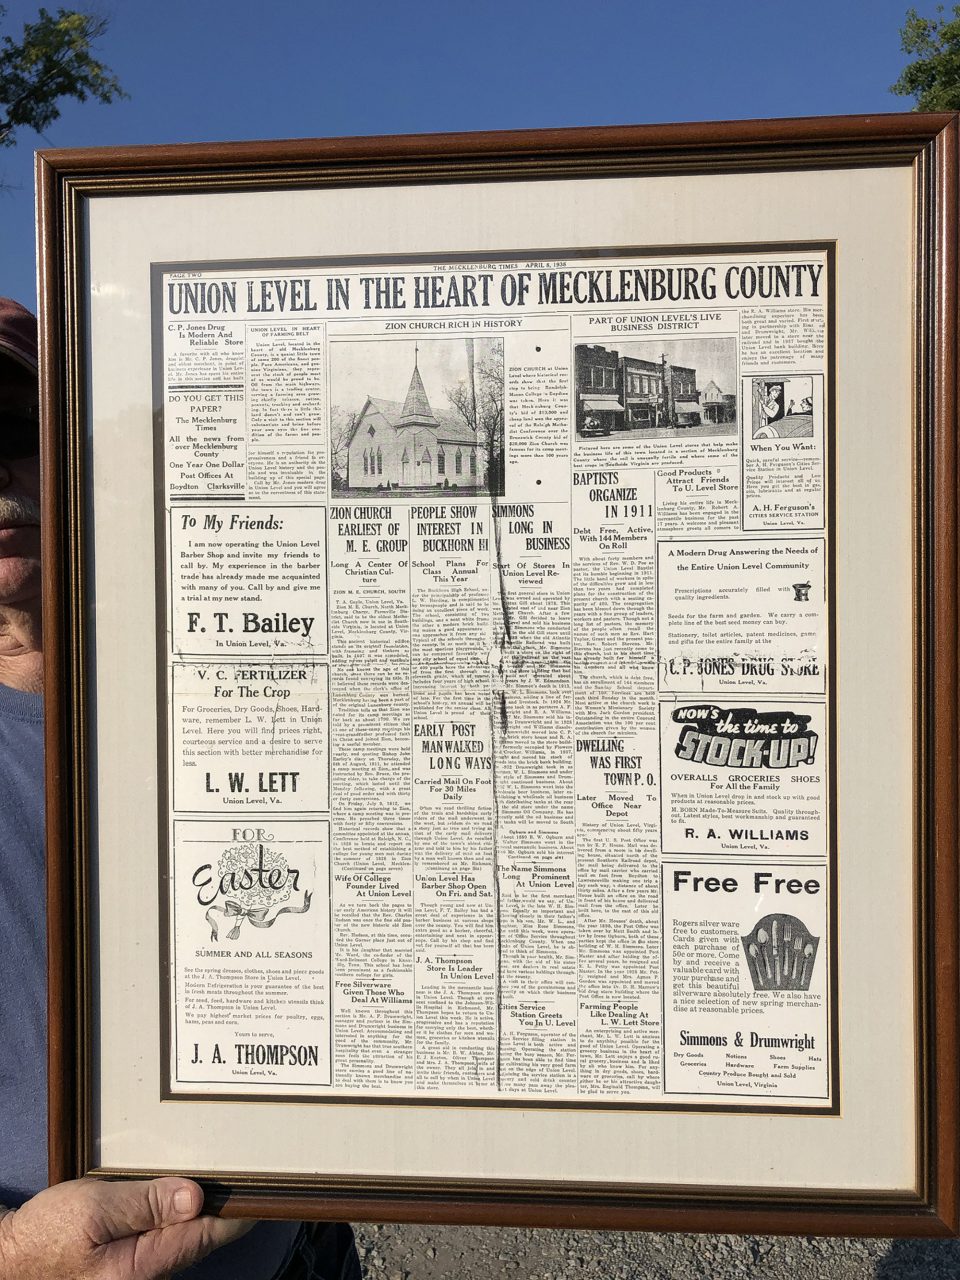 Close-up look at a page from the April 1938 Mecklenburg Times newspaper with ads and stories about Union Level, Virginia.